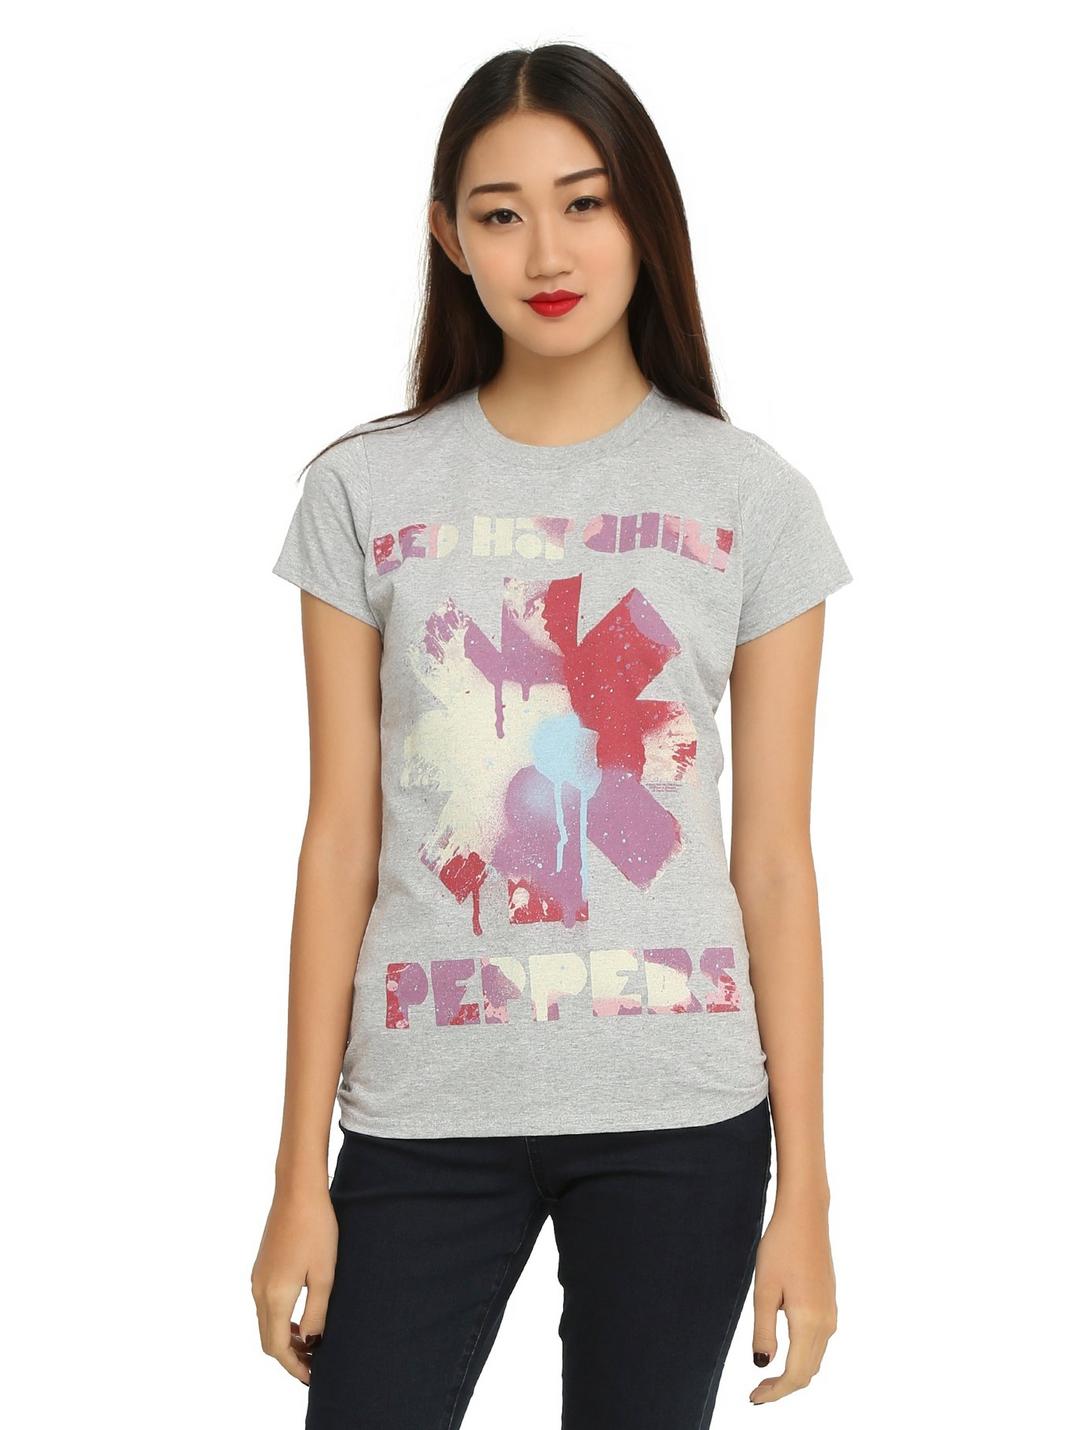 Red Hot Chili Peppers Paint Drip Logo Girls T-Shirt, HEATHER GREY, hi-res